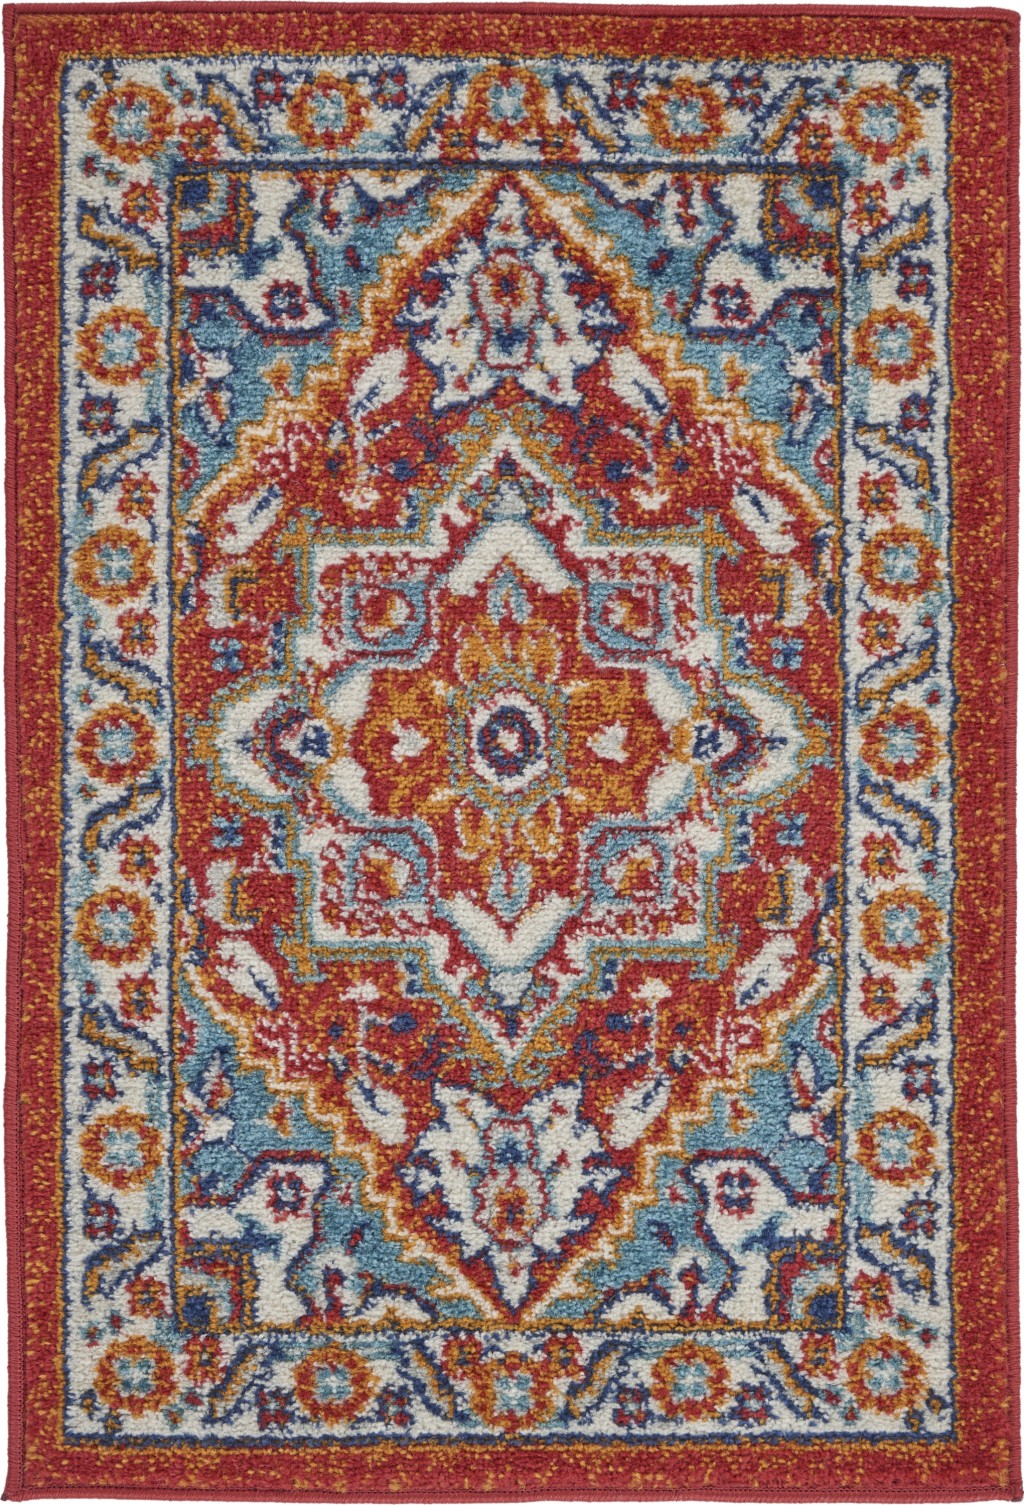 2' X 3' Red And Ivory Power Loom Area Rug-385653-1